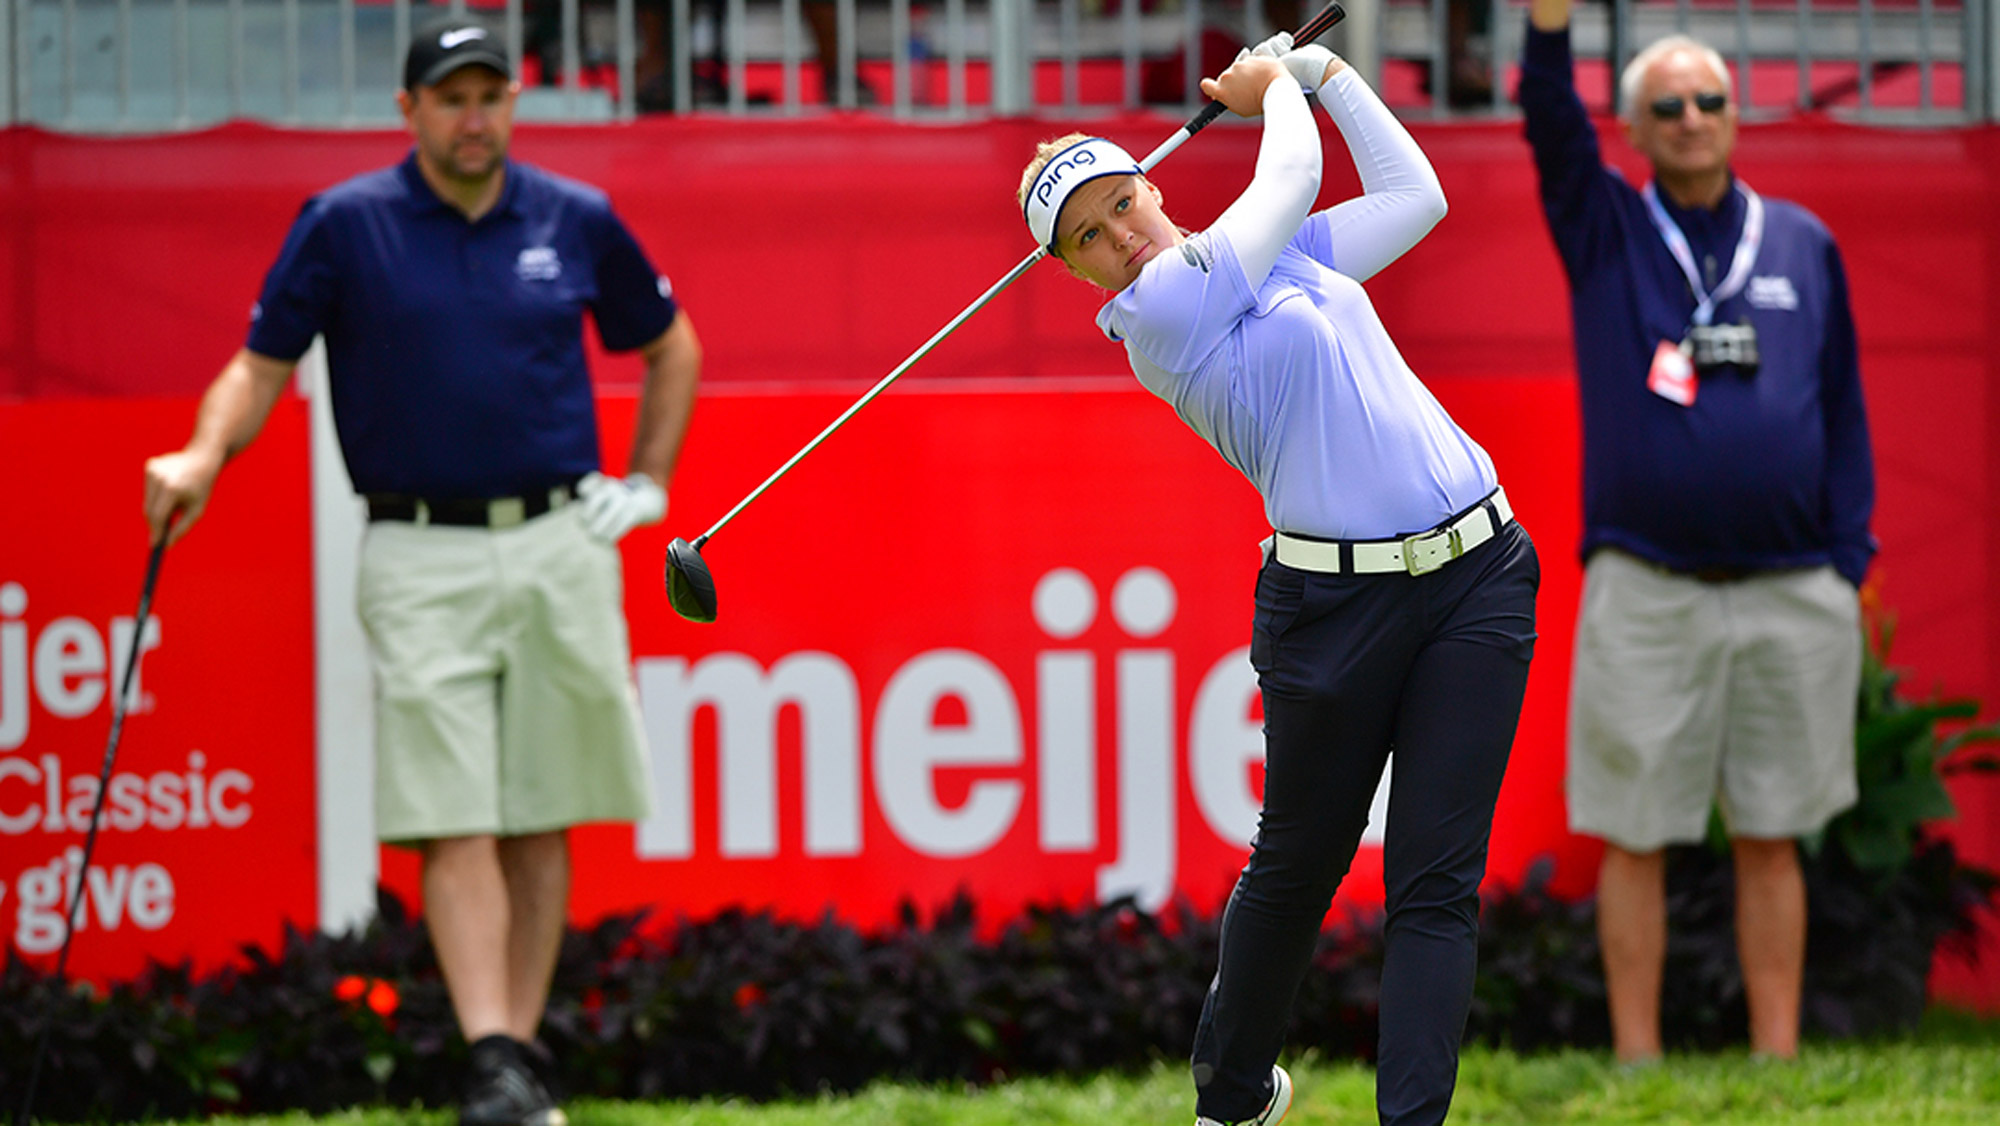 Brooke Henderson Takes a Swing at the Meijer LPGA Classic